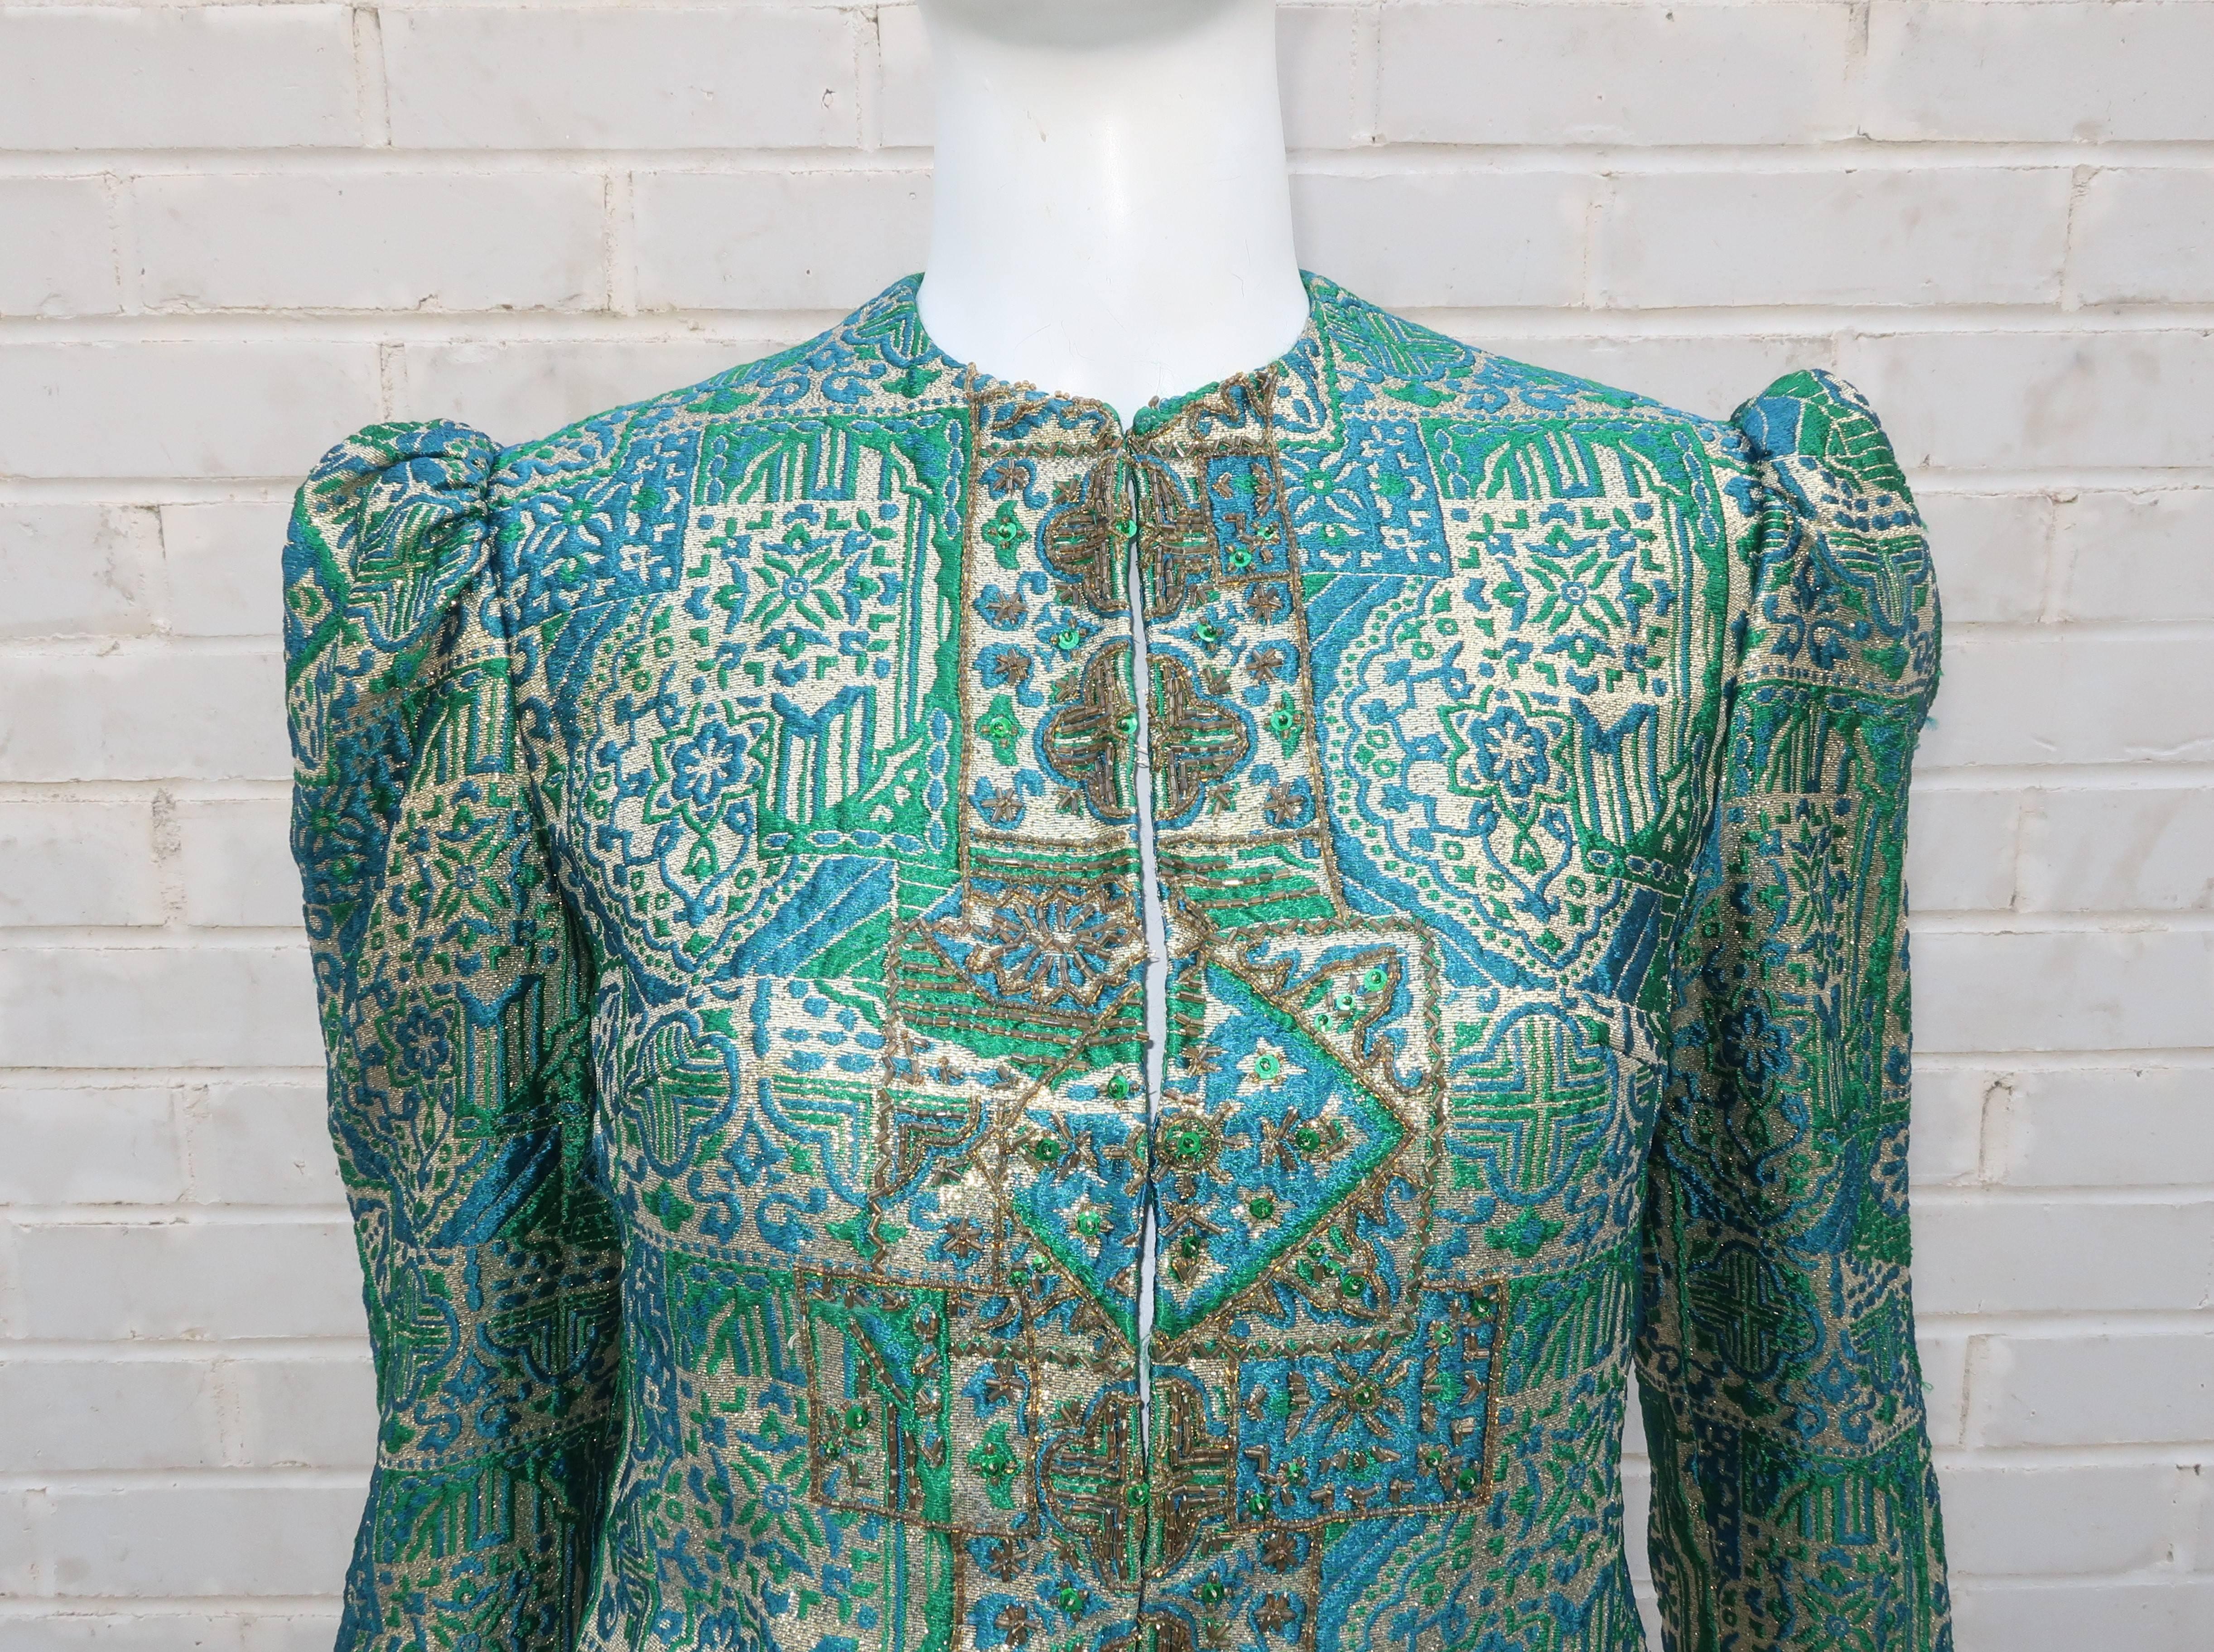 Rich & regal!  Apt descriptions for this fitted 1960's Victoria Royal evening jacket in a glorious peacock blue and jade green brocade with gold lamé threading and beaded embellishments.  The exotic Asian pattern is effectively used as a